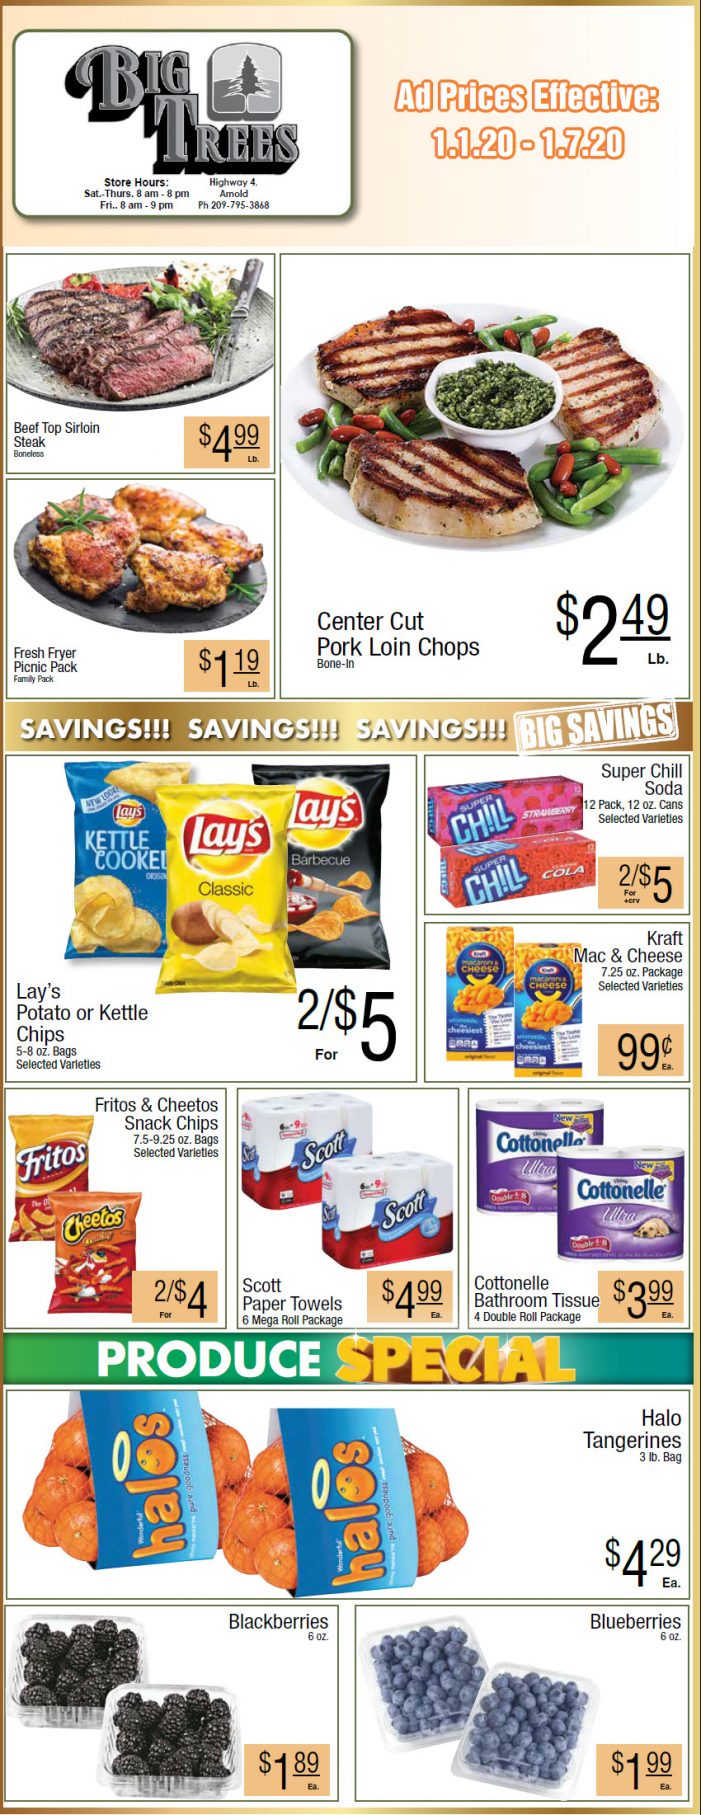 Big Trees Market Weekly Ad & Grocery Specials Through January 7th